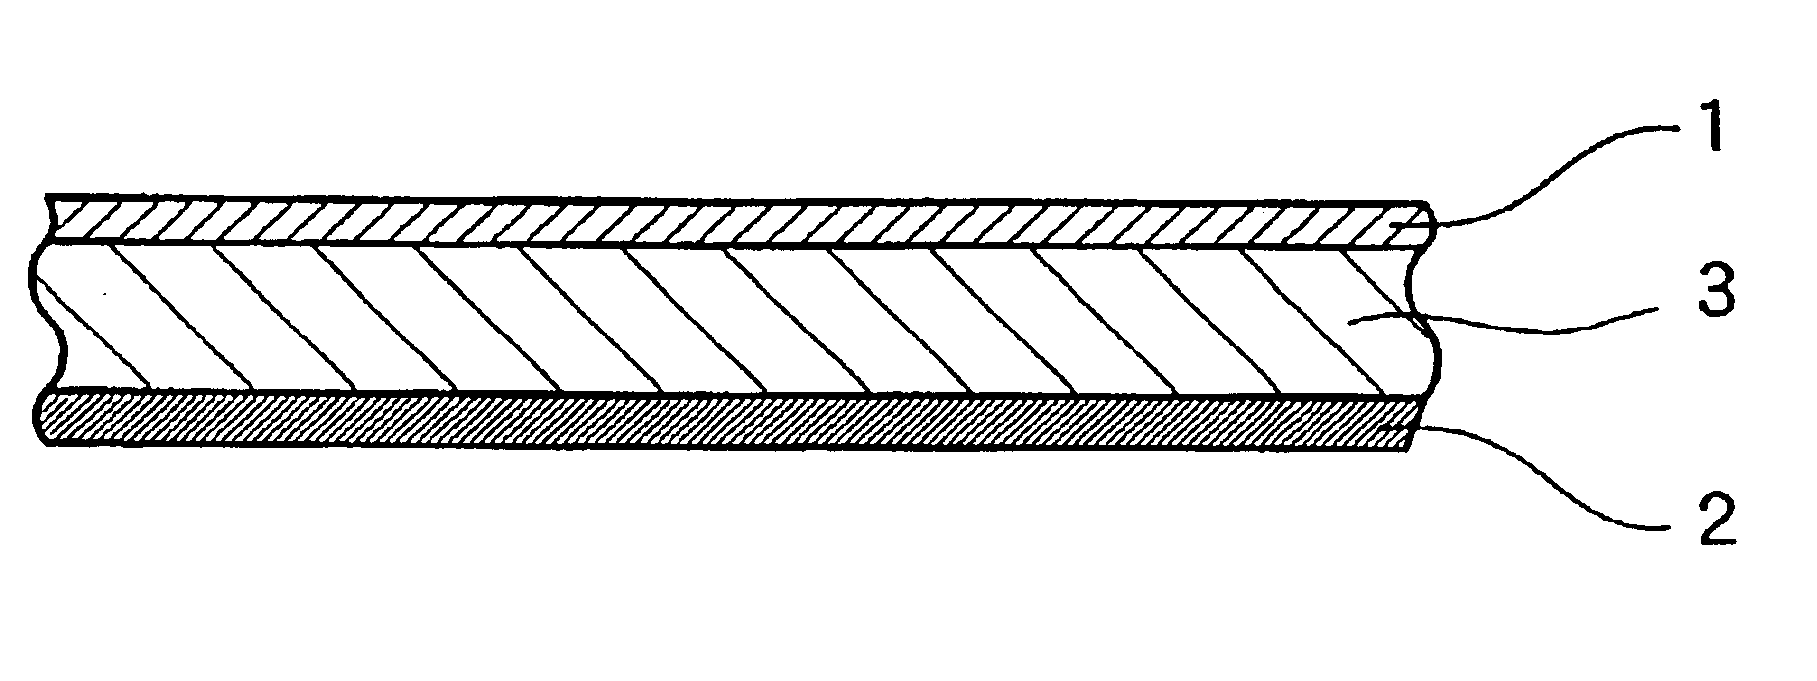 Porous polypropylene film, process for producing the same, and absorbent article employing the film